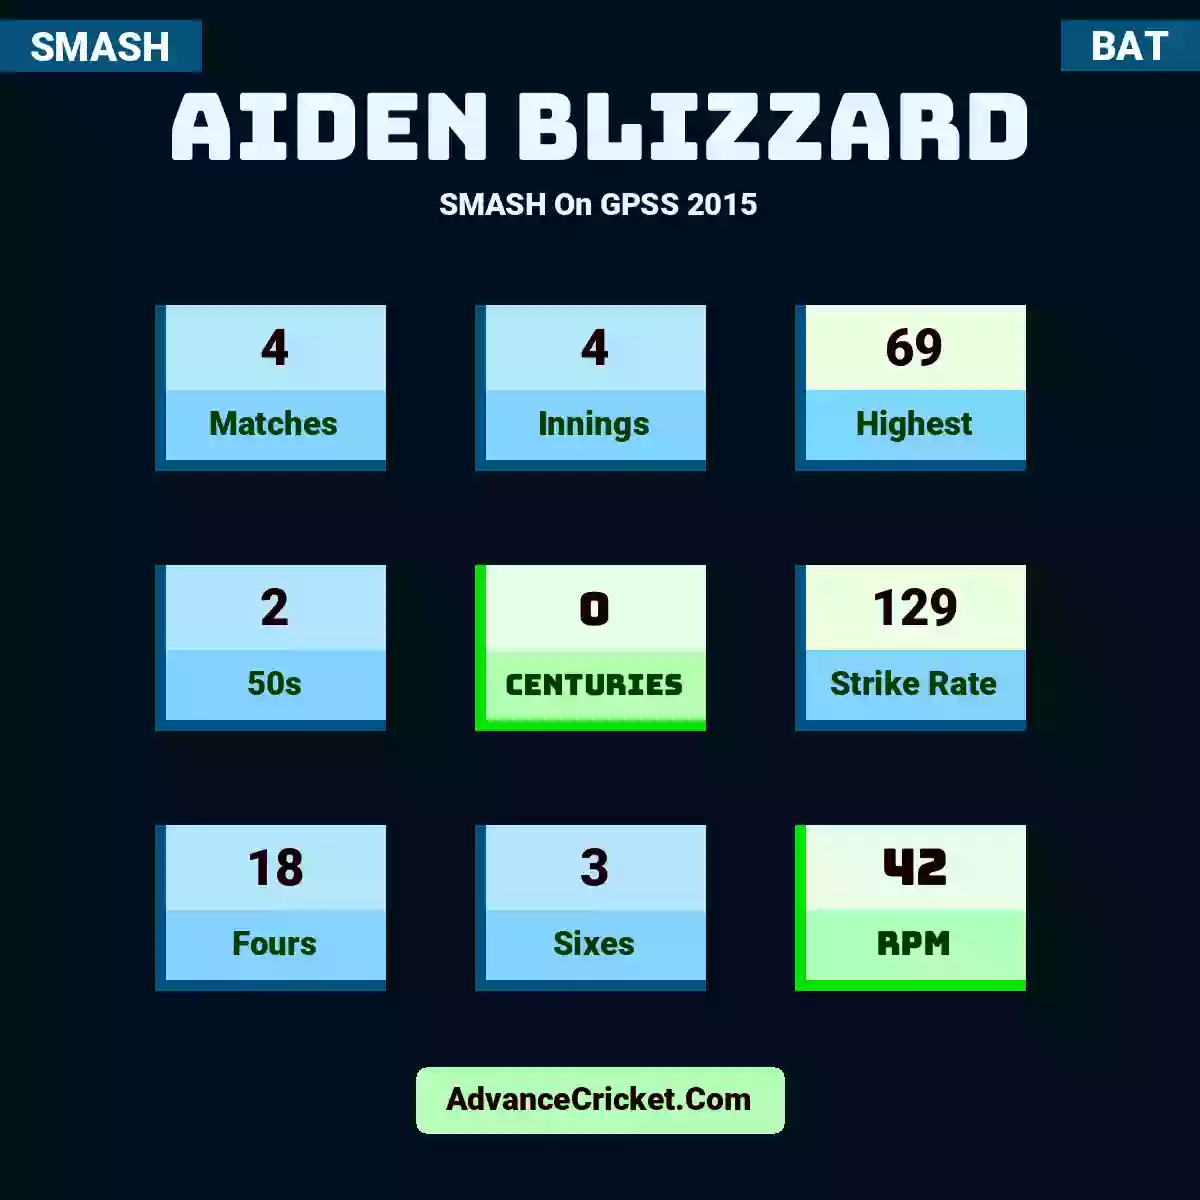 Aiden Blizzard SMASH  On GPSS 2015, Aiden Blizzard played 4 matches, scored 69 runs as highest, 2 half-centuries, and 0 centuries, with a strike rate of 129. A.Blizzard hit 18 fours and 3 sixes, with an RPM of 42.